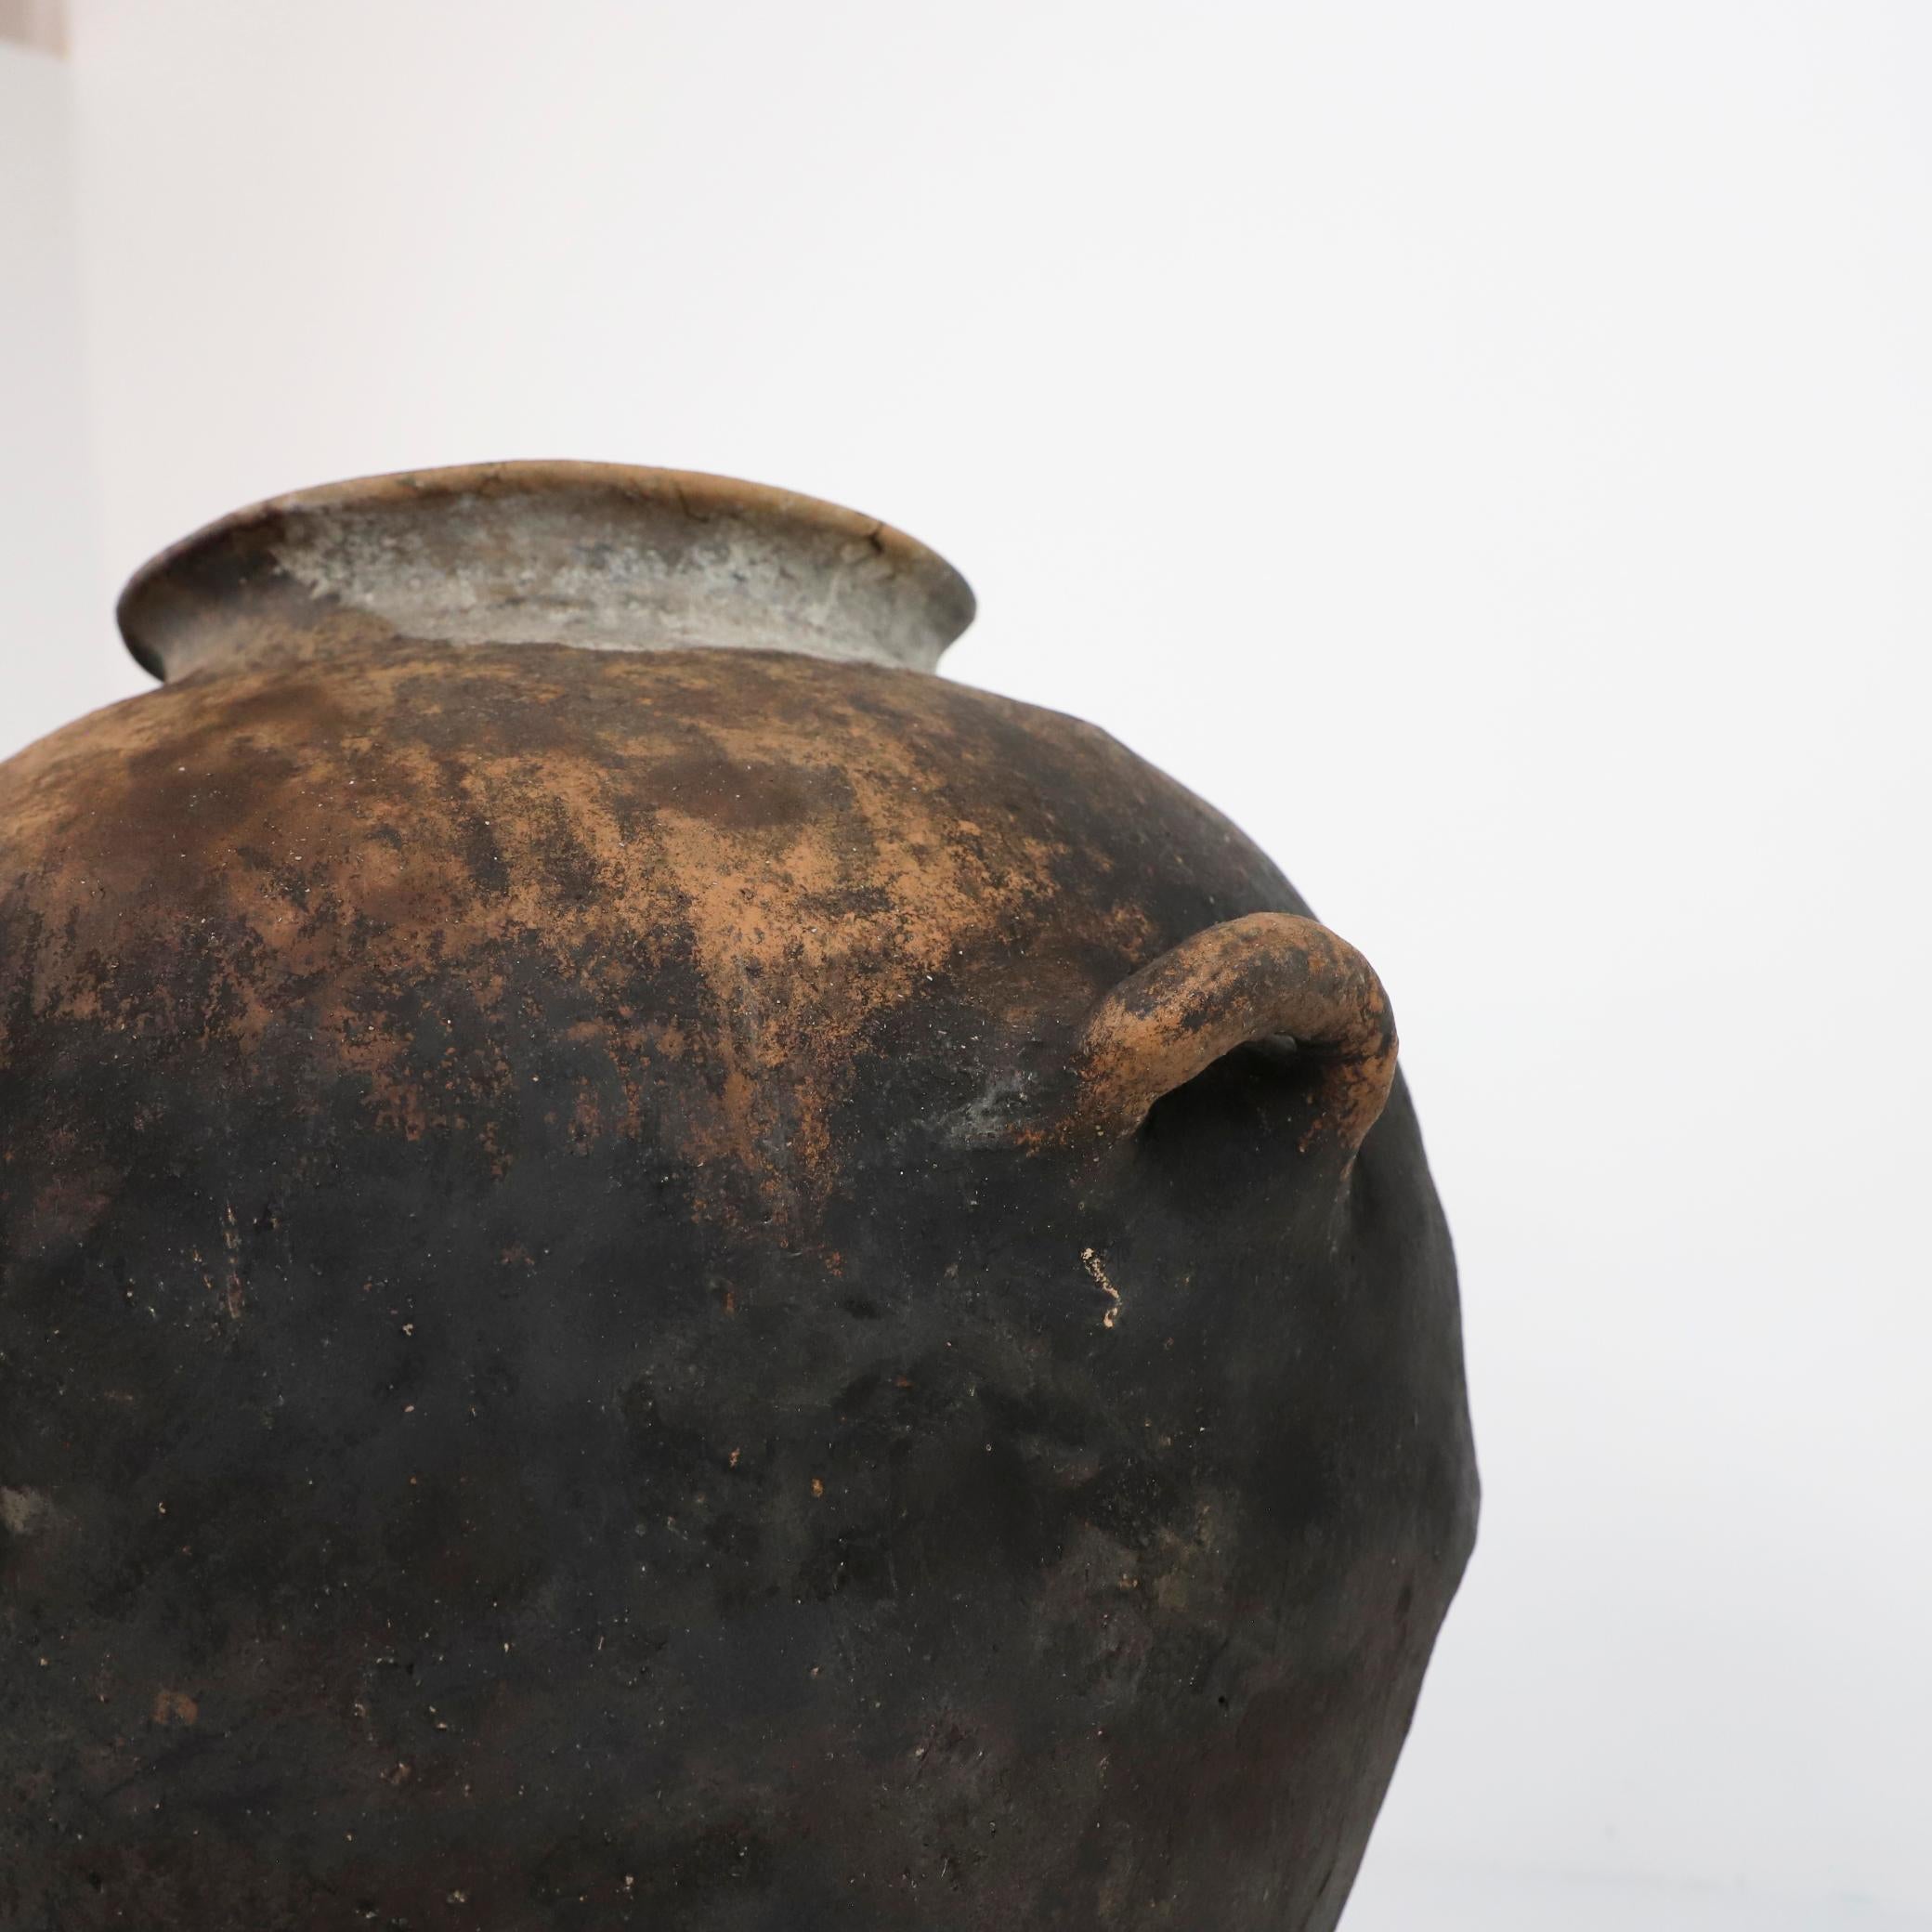 Circa 1940, We offer this fantastic ancient barro pot from Mexico, made in Puebla México hand crafted. This style of pottery is very rare, originally used for storing water from nearby rivers.